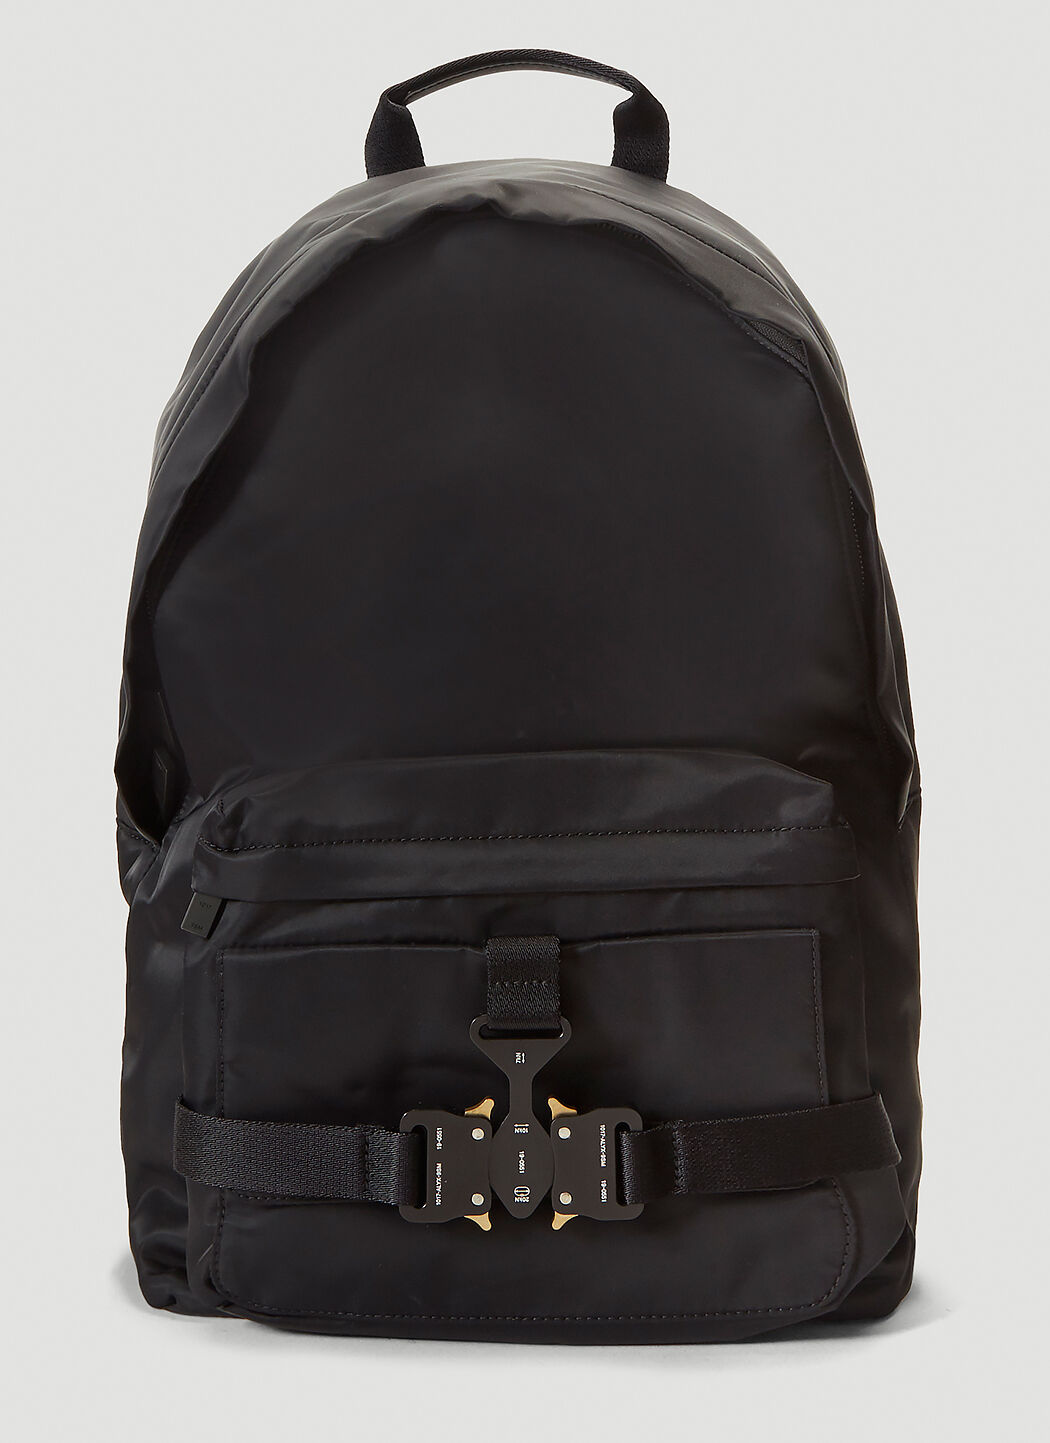 1017 ALYX 9SM Tricon Backpack 灰色 aly0152002